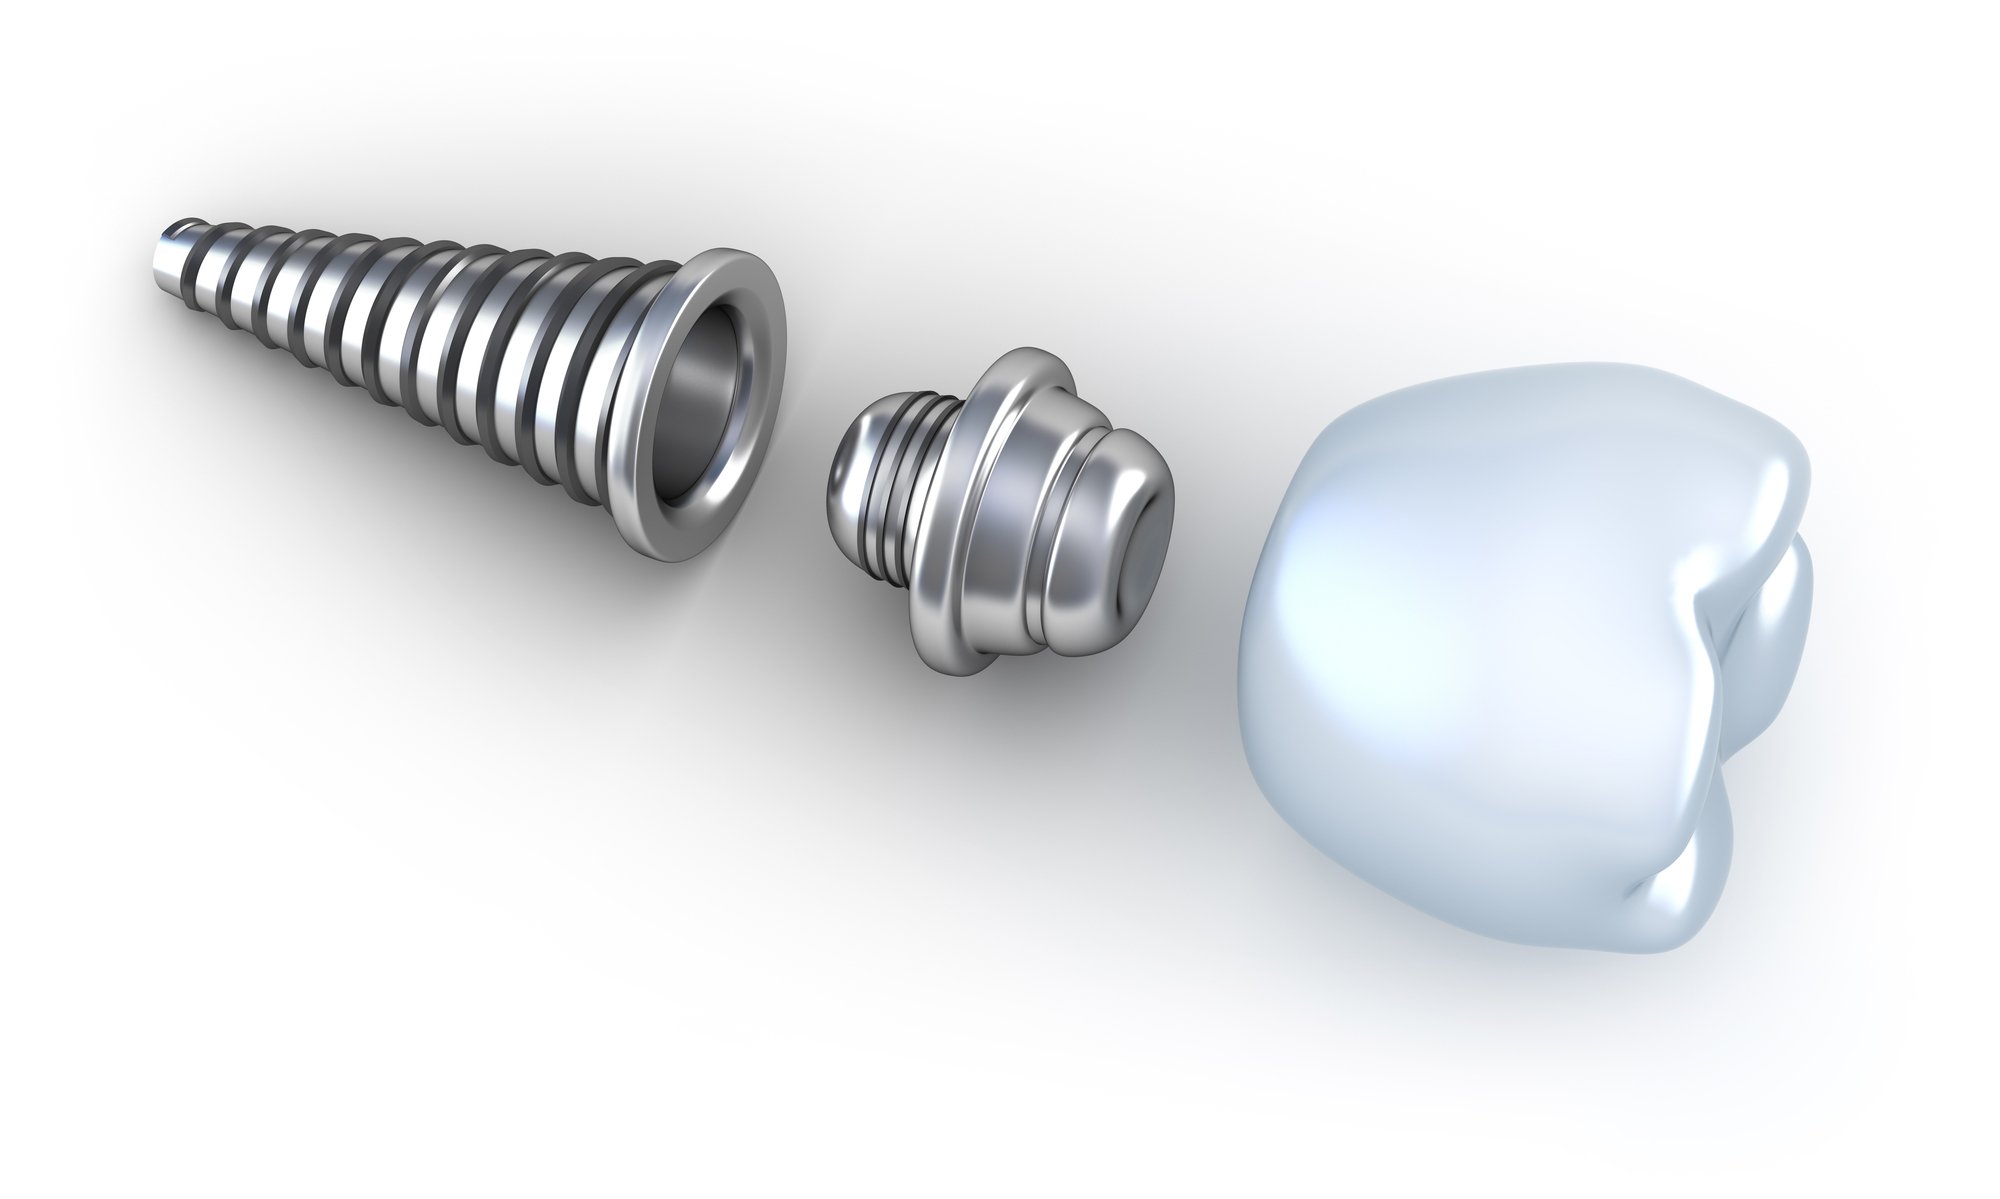 parts of dental implant